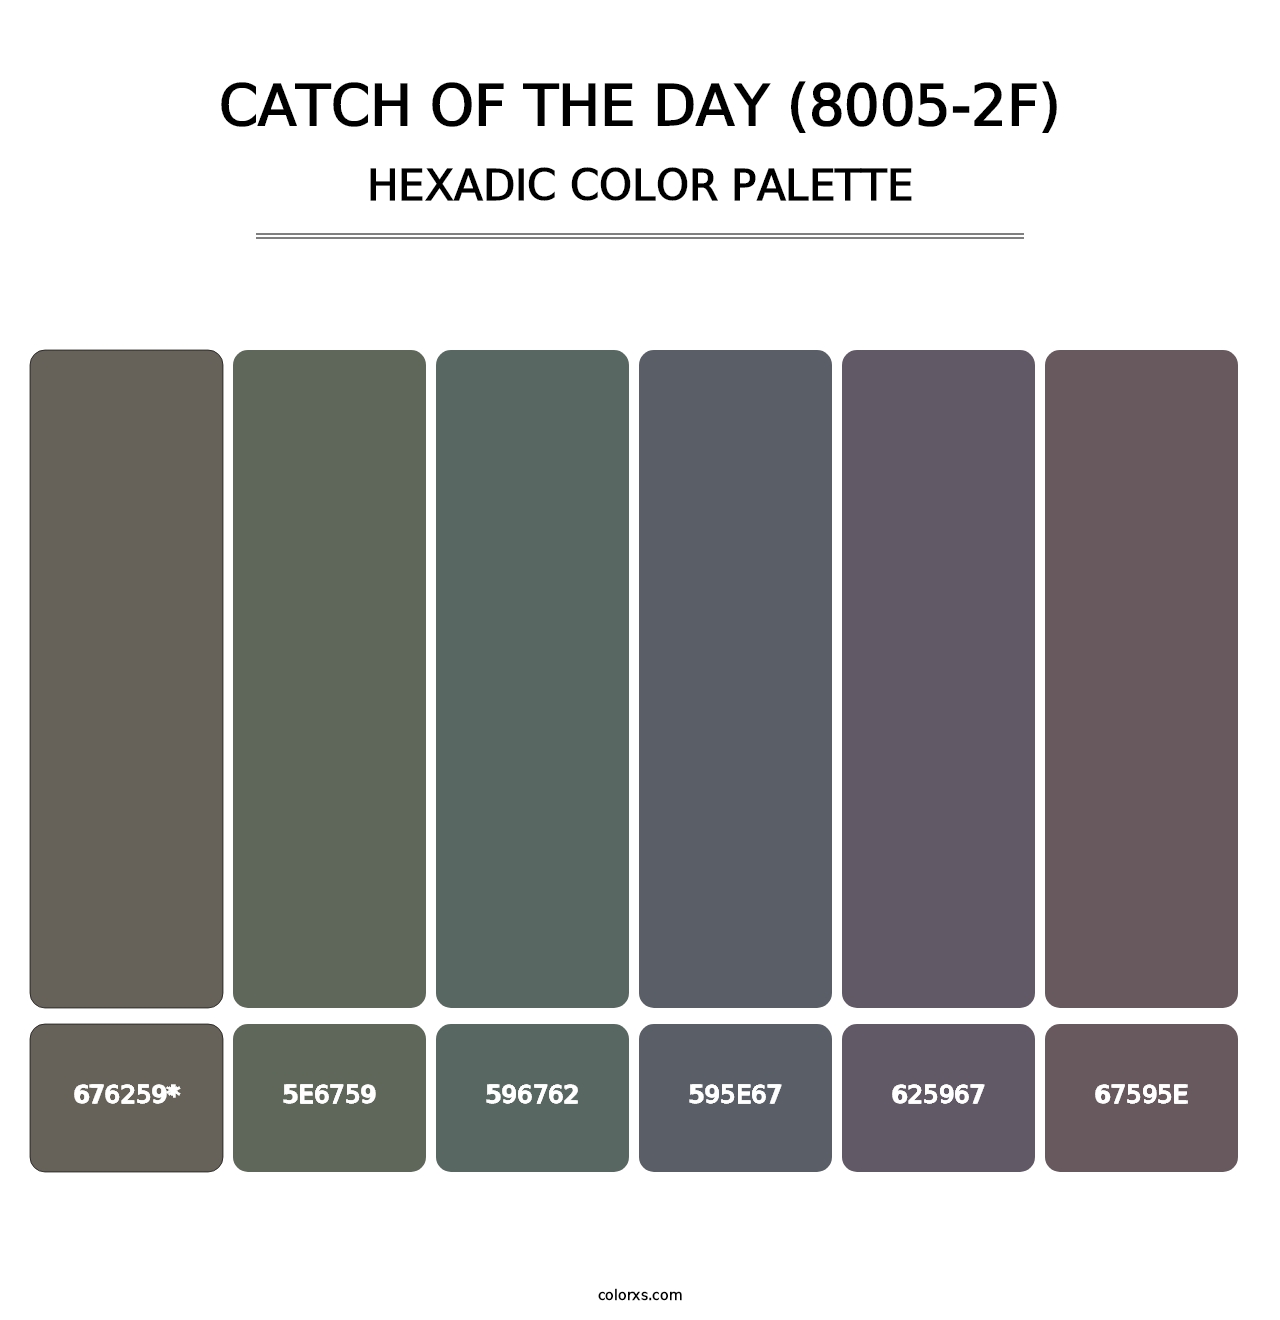 Catch of the Day (8005-2F) - Hexadic Color Palette